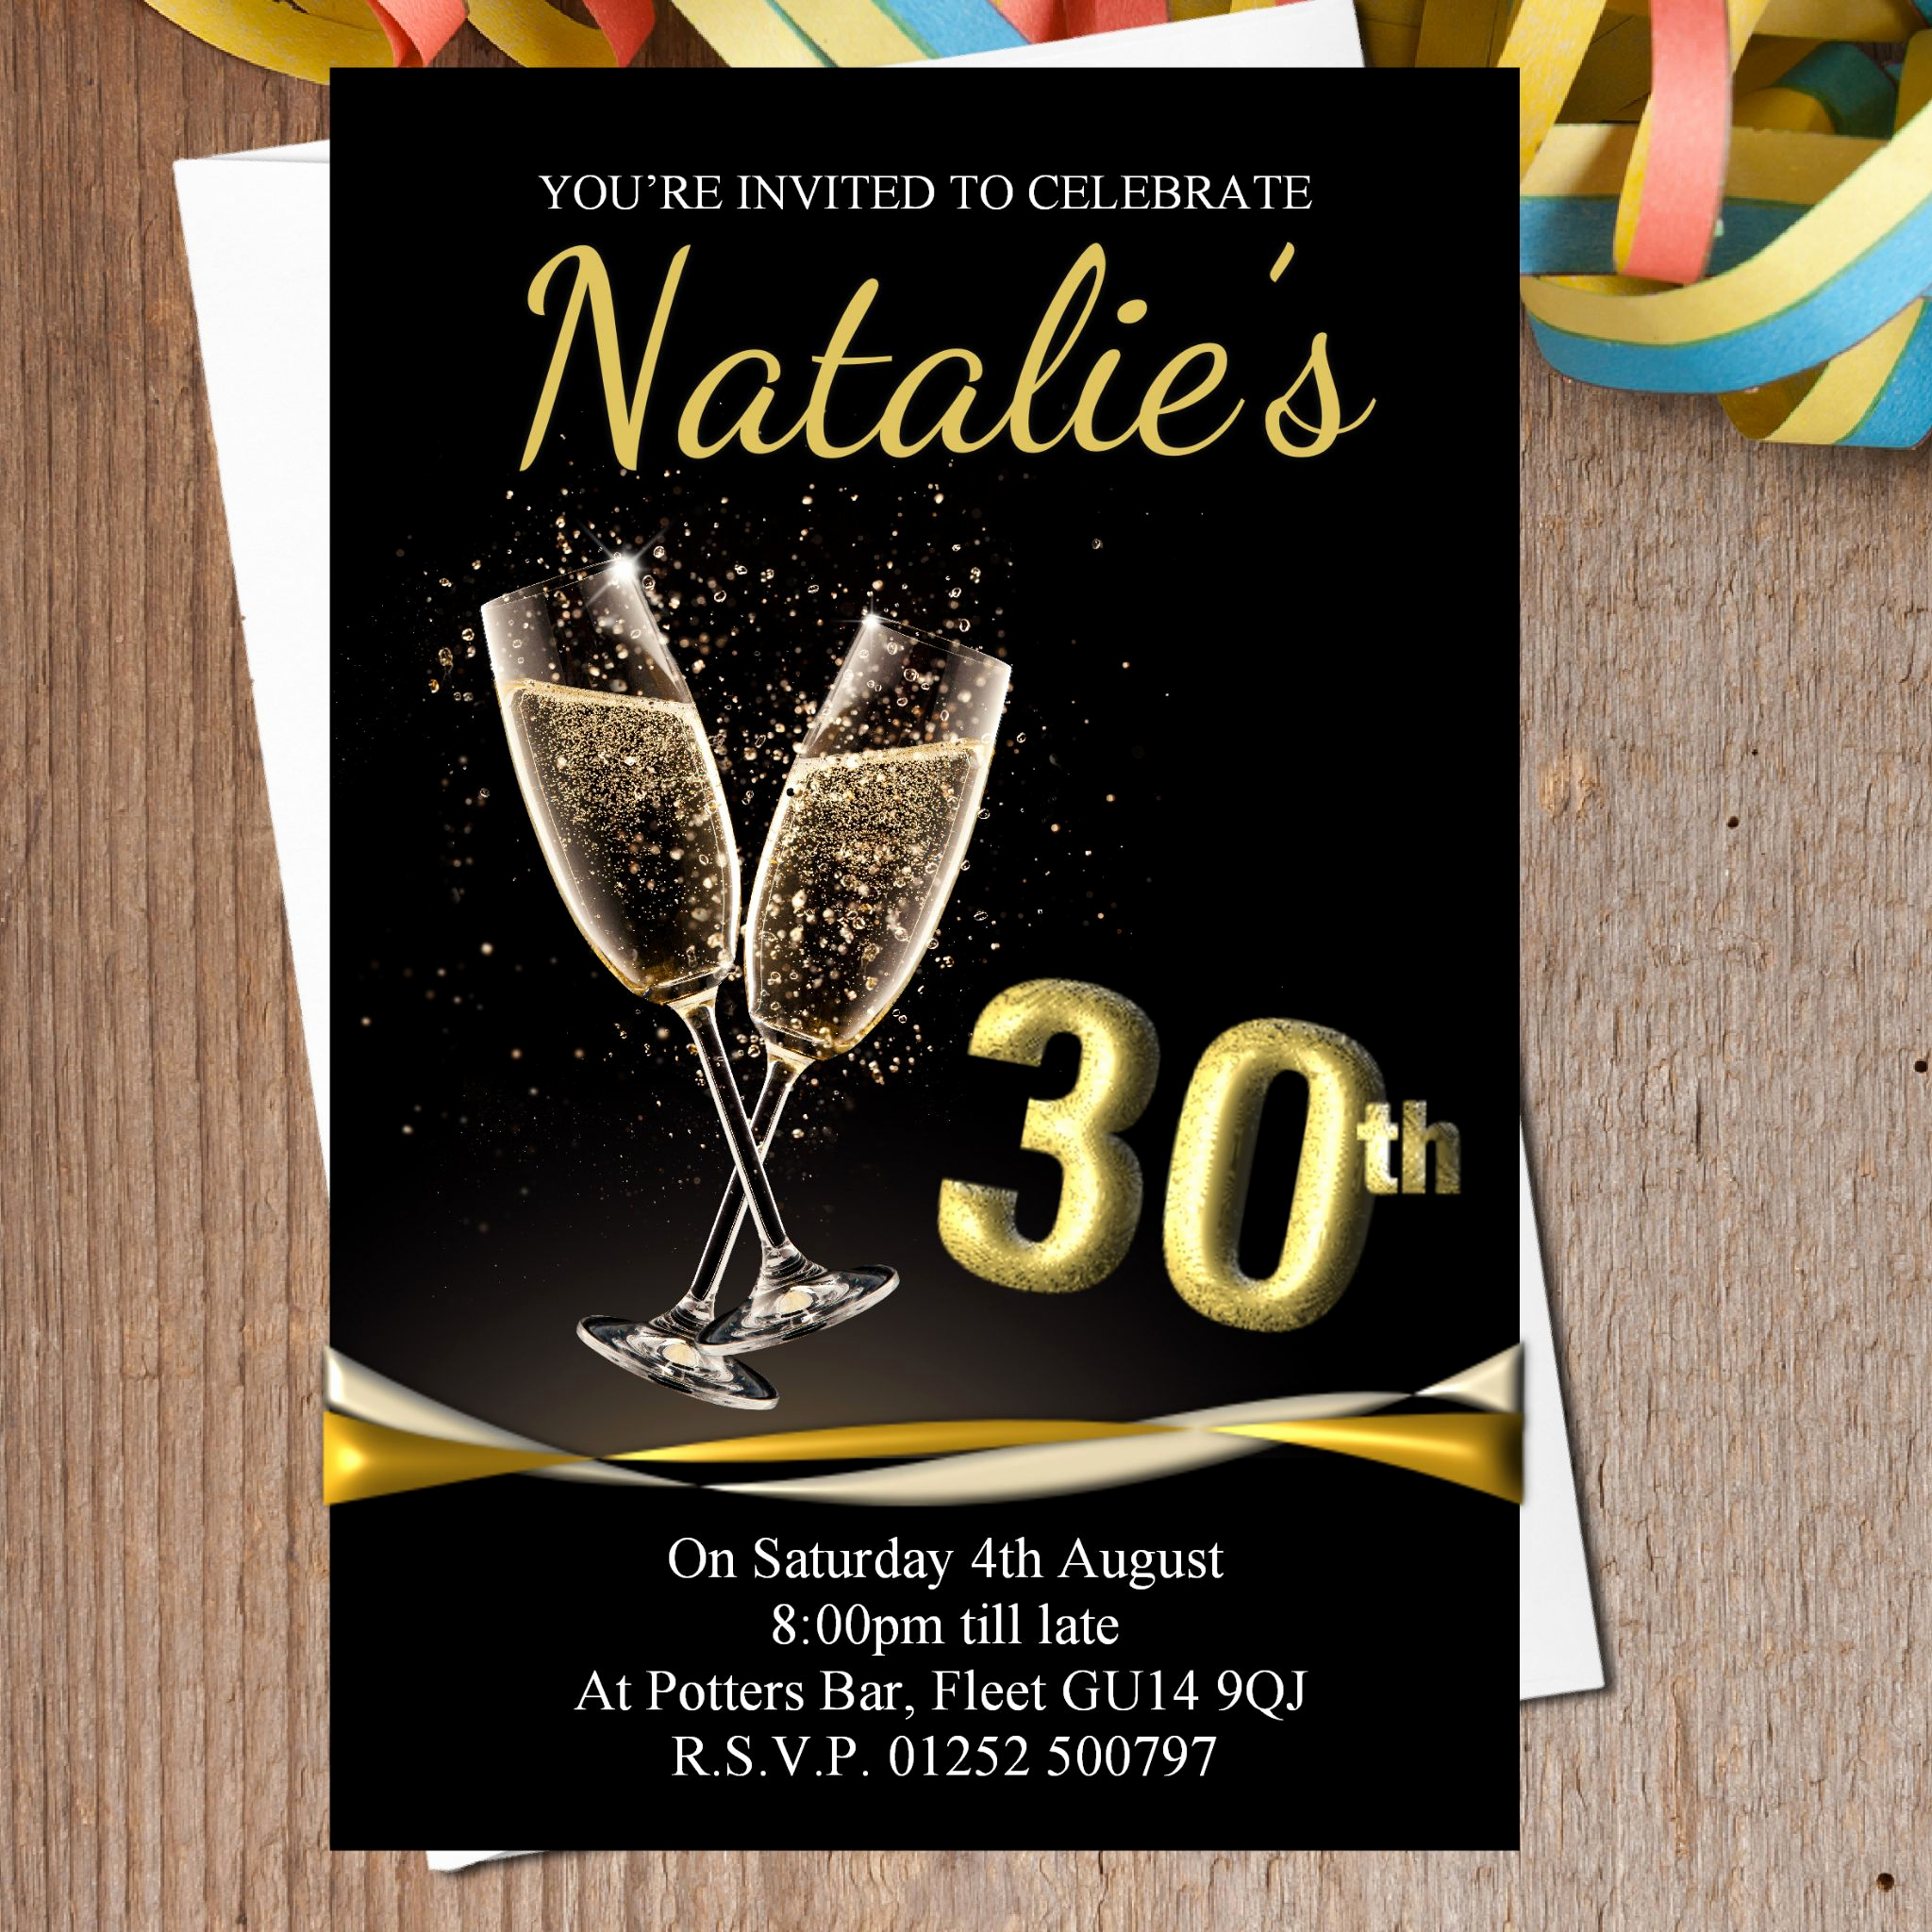 Black and Gold Invitation Beautiful 10 Personalised Black &amp; Gold Champagne Birthday Party